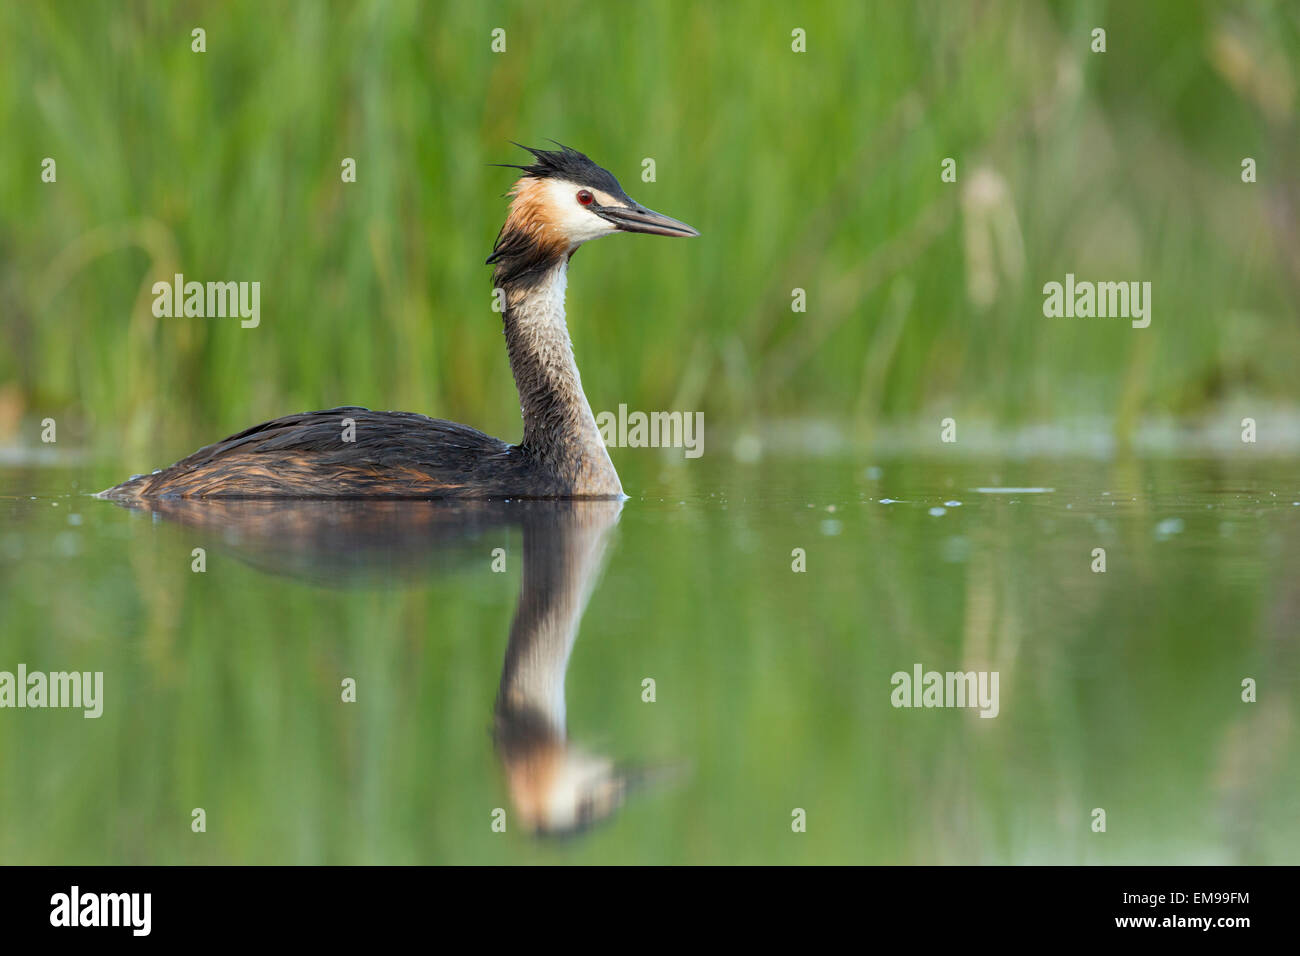 Adult Great crested Grebe Podiceps cristatus swimming in marsh with lush green foliage in background Tiszaalpár, Hungary Stock Photo